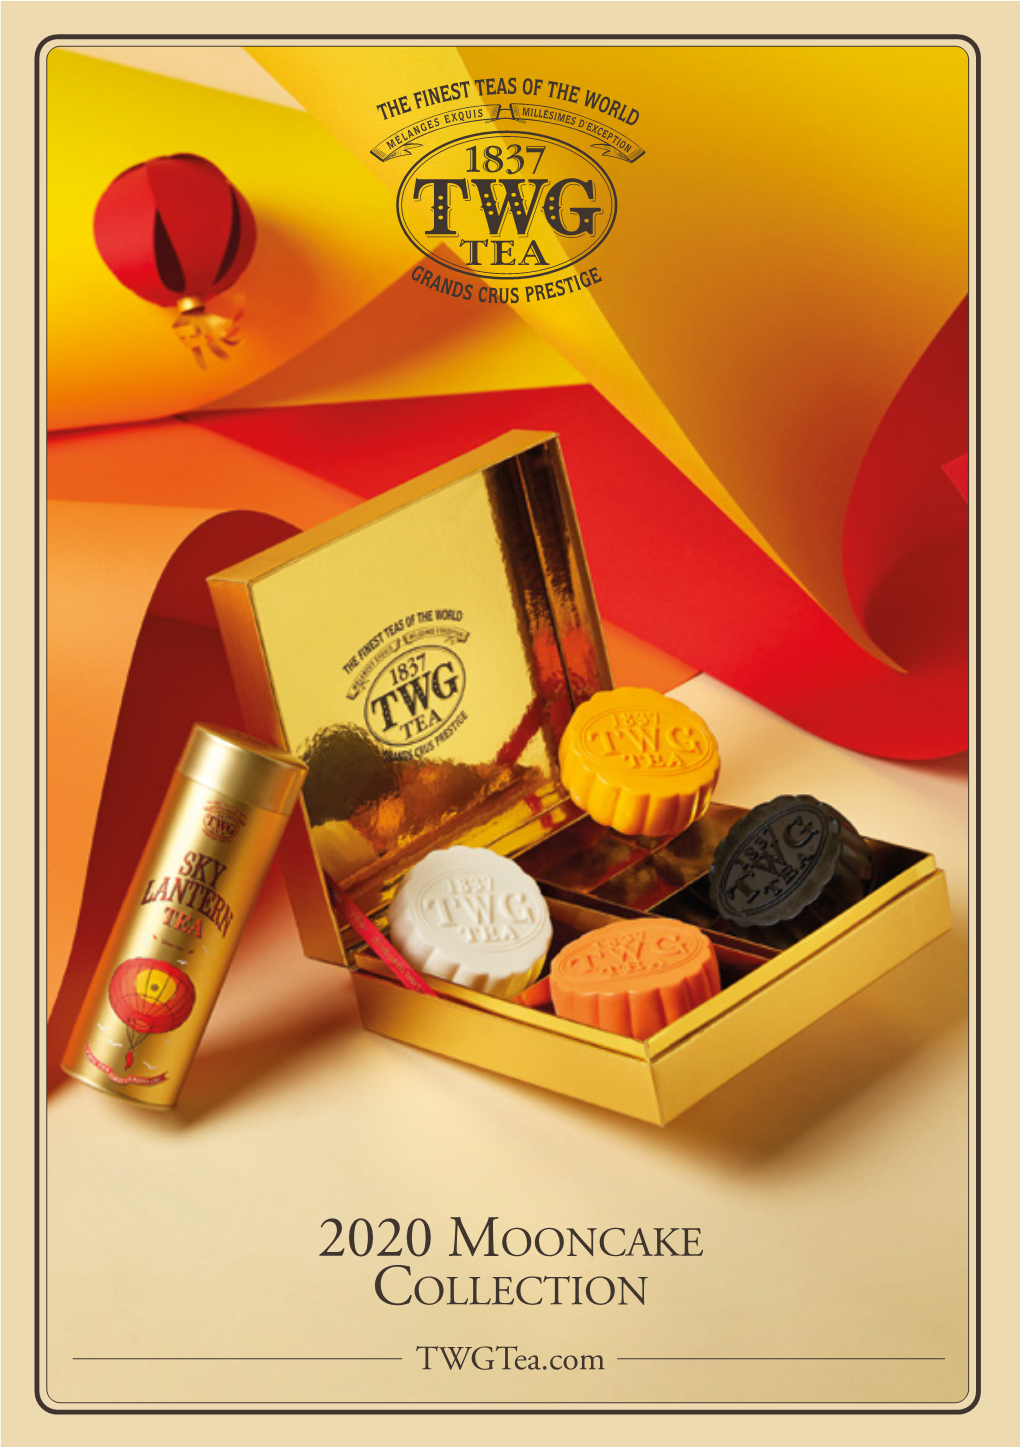 2020 MOONCAKE COLLECTION Twgtea.Com INTRODUCING SKY LANTERN TEA a Myriad of Flickering Candles Illuminate the Sky While Steaming Cups Bring Cheer and Good Fortune